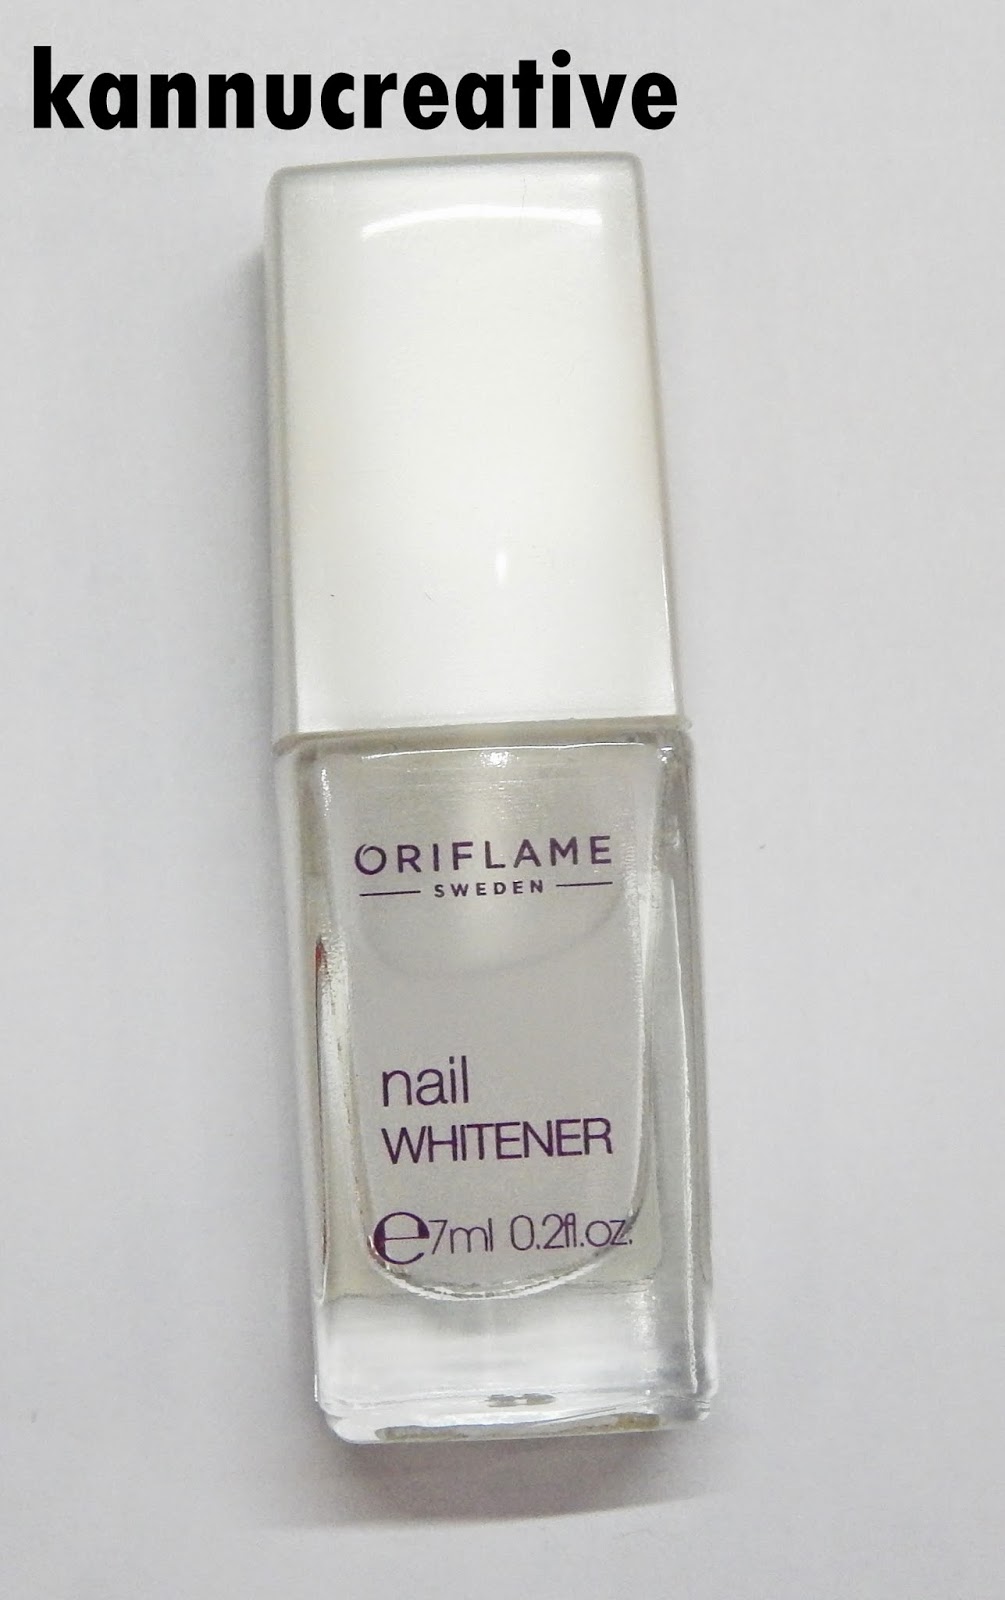 Oriflame Nail Whitener: Review + Swatch + Demo + Results